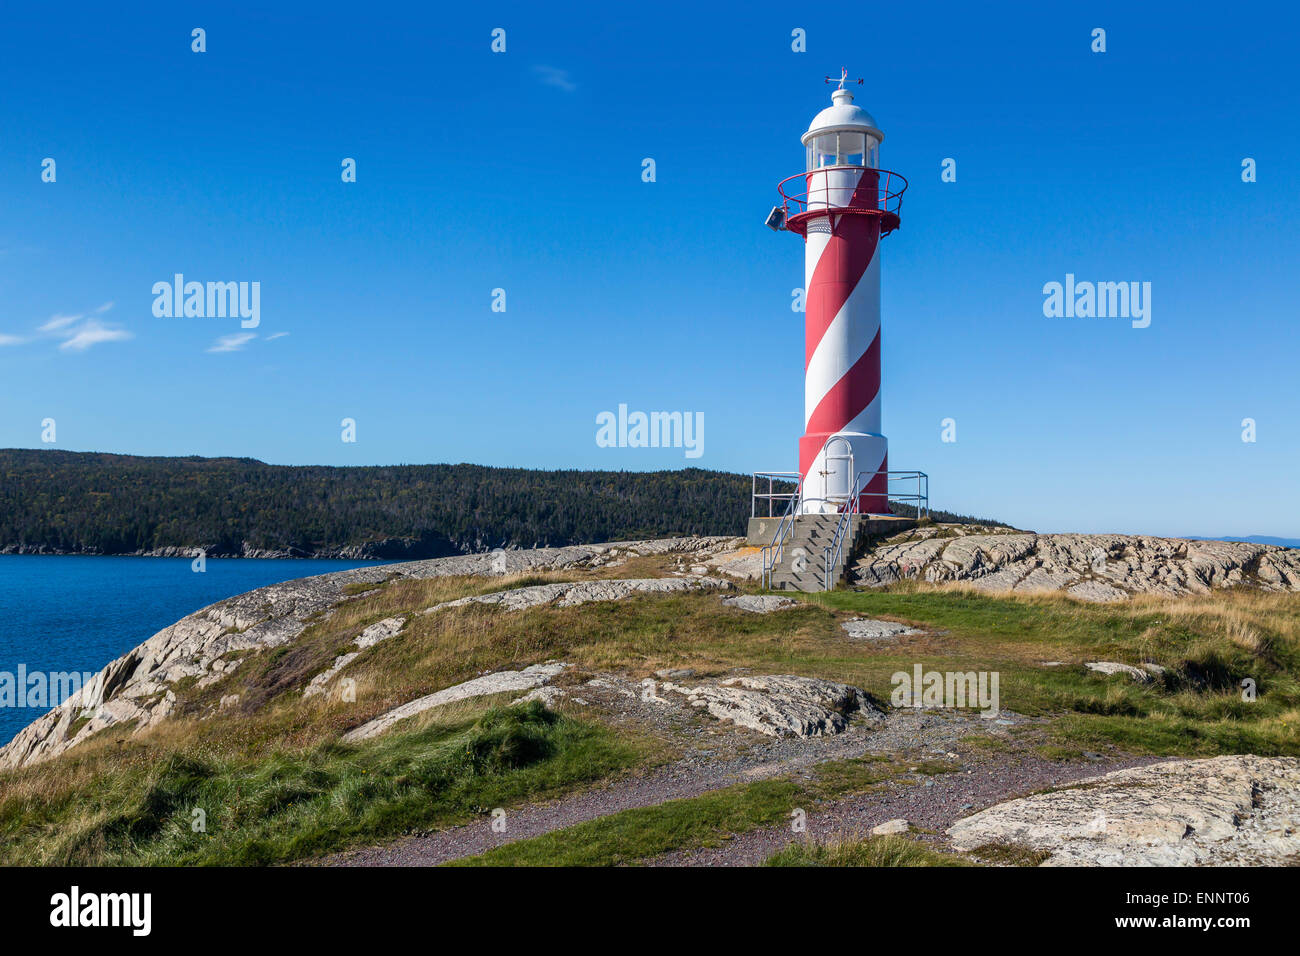 Candy cane colored lighthouse in Heart's Delight, Newfoundland, Canada. Stock Photo